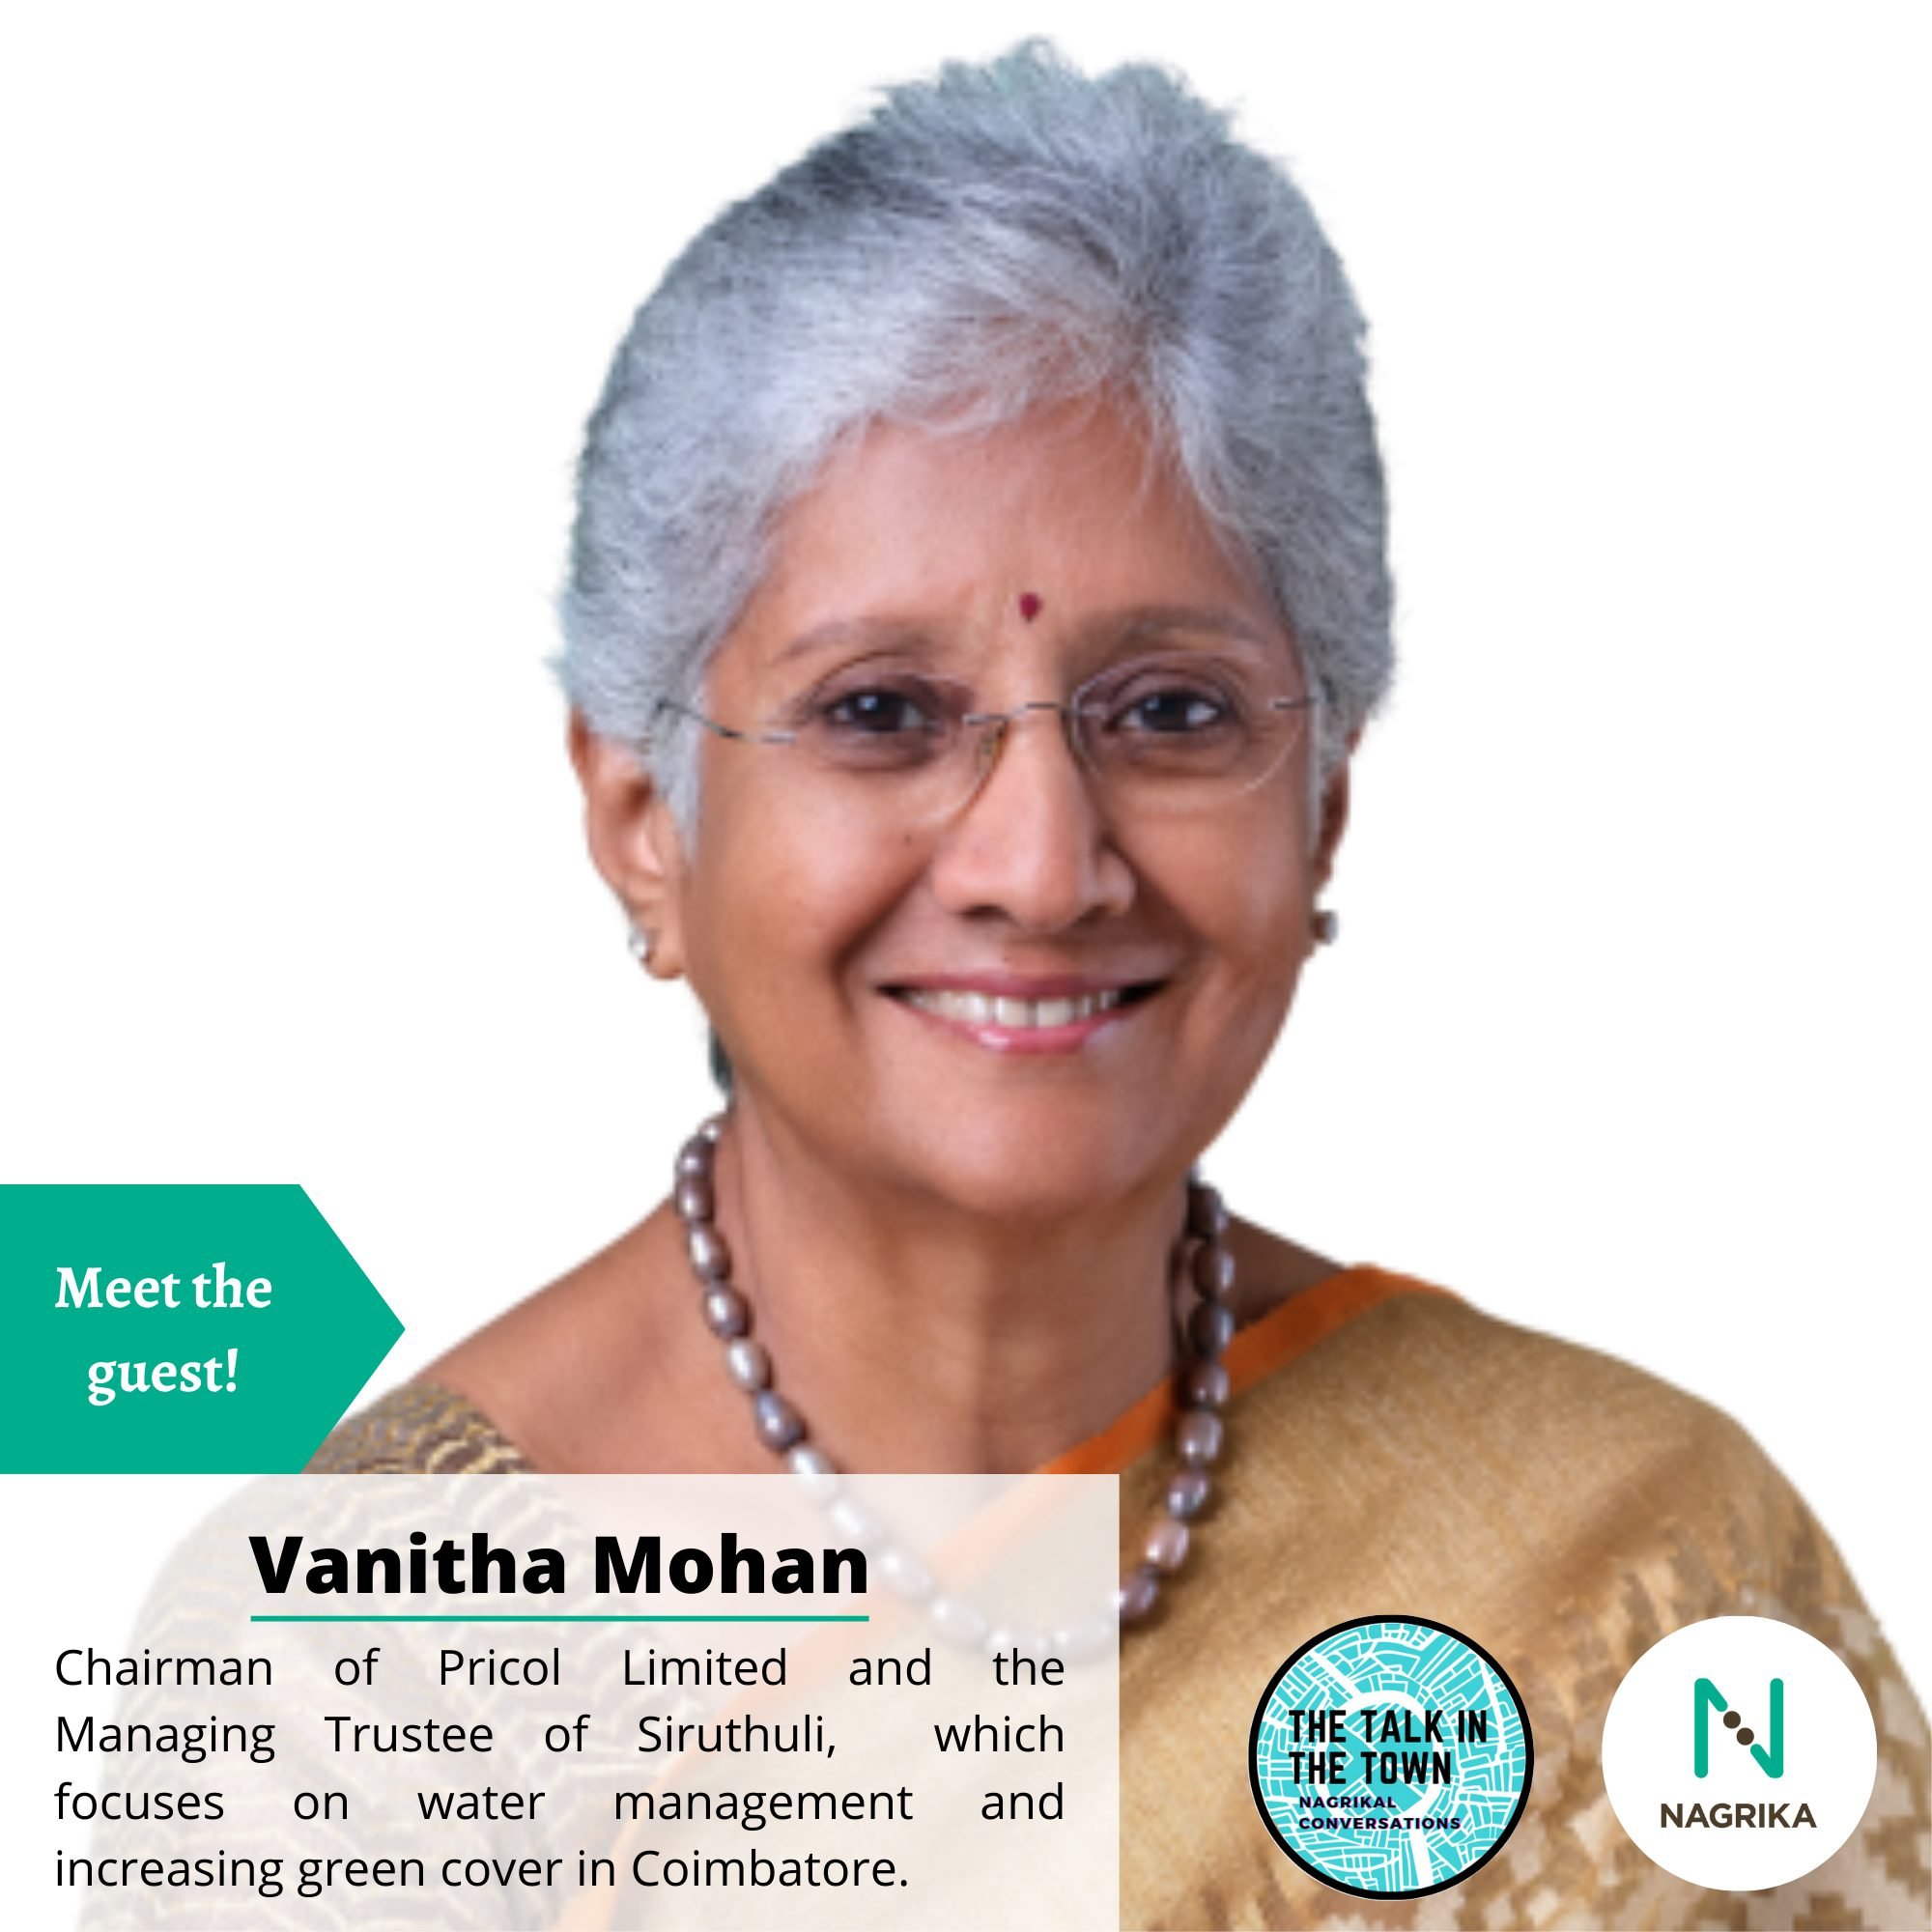 #Talkinthetown
On episode 5 of Season 3 of our podcast Talk in Town, we spoke to Ms. Vanitha Mohan. She is a prominent entrepreneur and passionate nature lover based in Coimbatore, Tamil Nadu.

Ms Mohan is currently the Chairman of Pricol Limited and